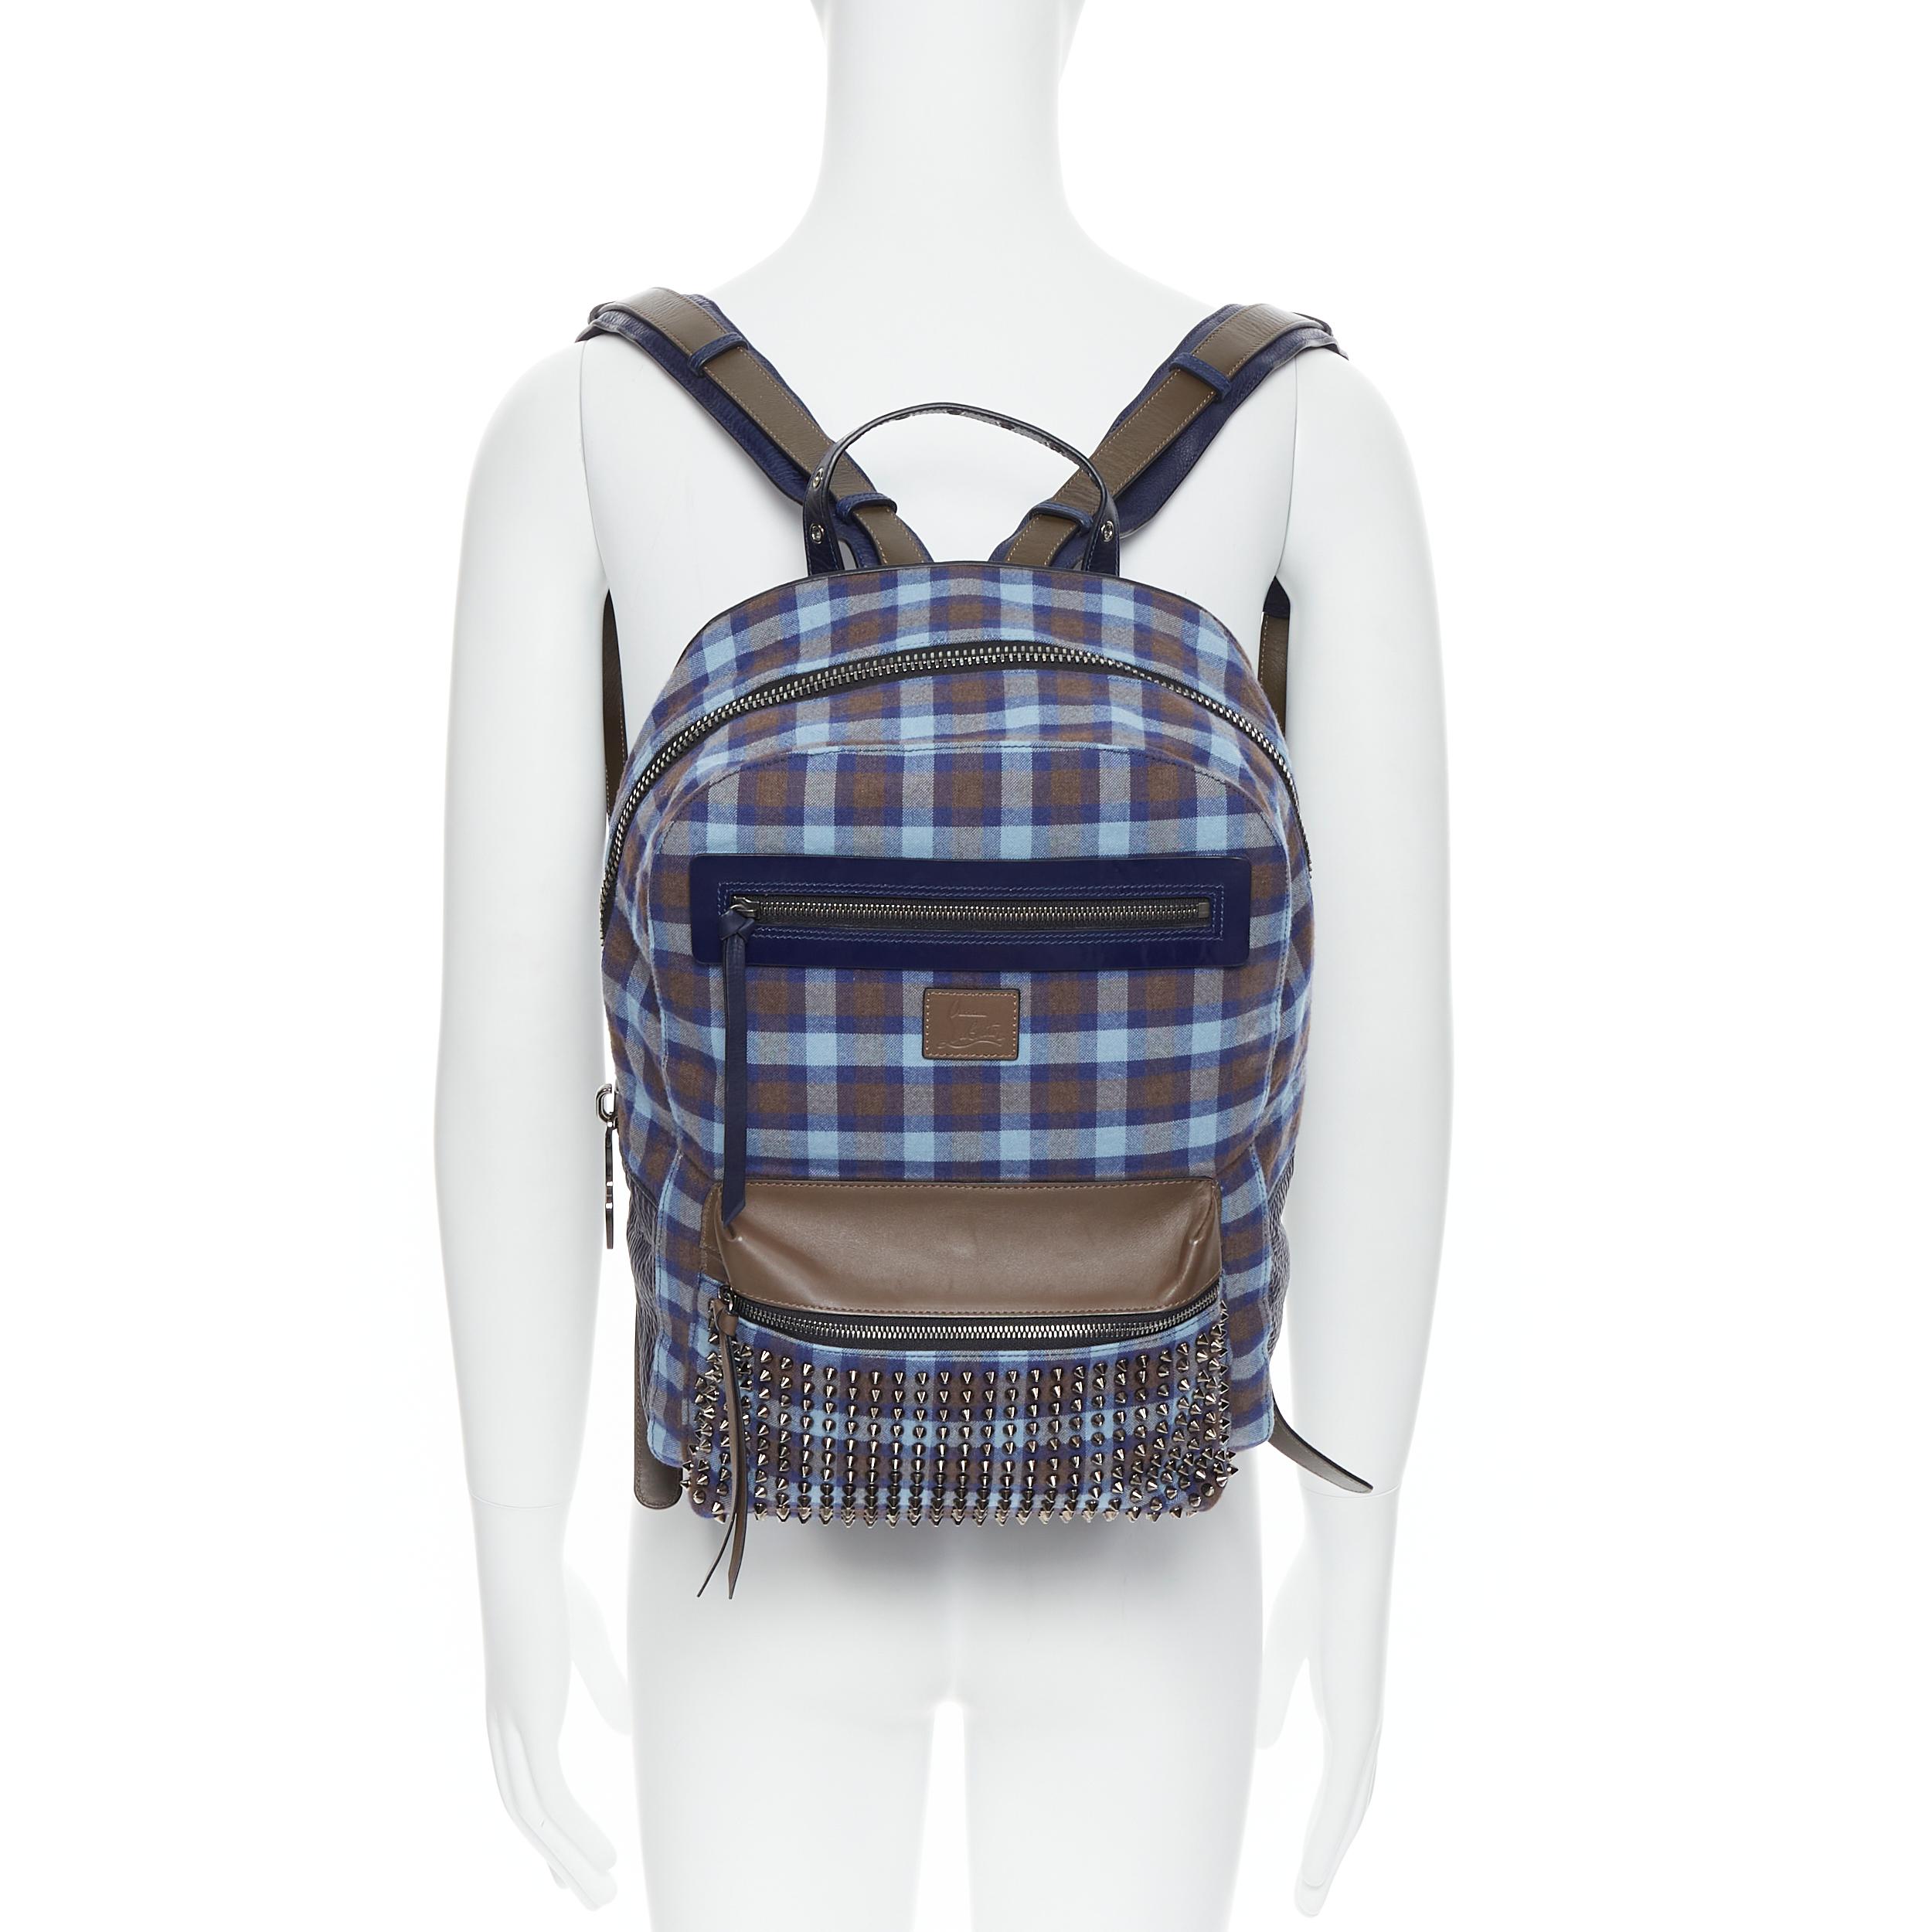 CHRISTIAN LOUBOUTIN Backloubi blue brown gingham check spike stud backpack bag 
Reference: TGAS/B00741 
Brand: Christian Louboutin 
Designer: Christian Louboutin 
Model: Backloubi 
Material: Fabric 
Color: Blue 
Pattern: Plaid 
Closure: Zip 
Extra